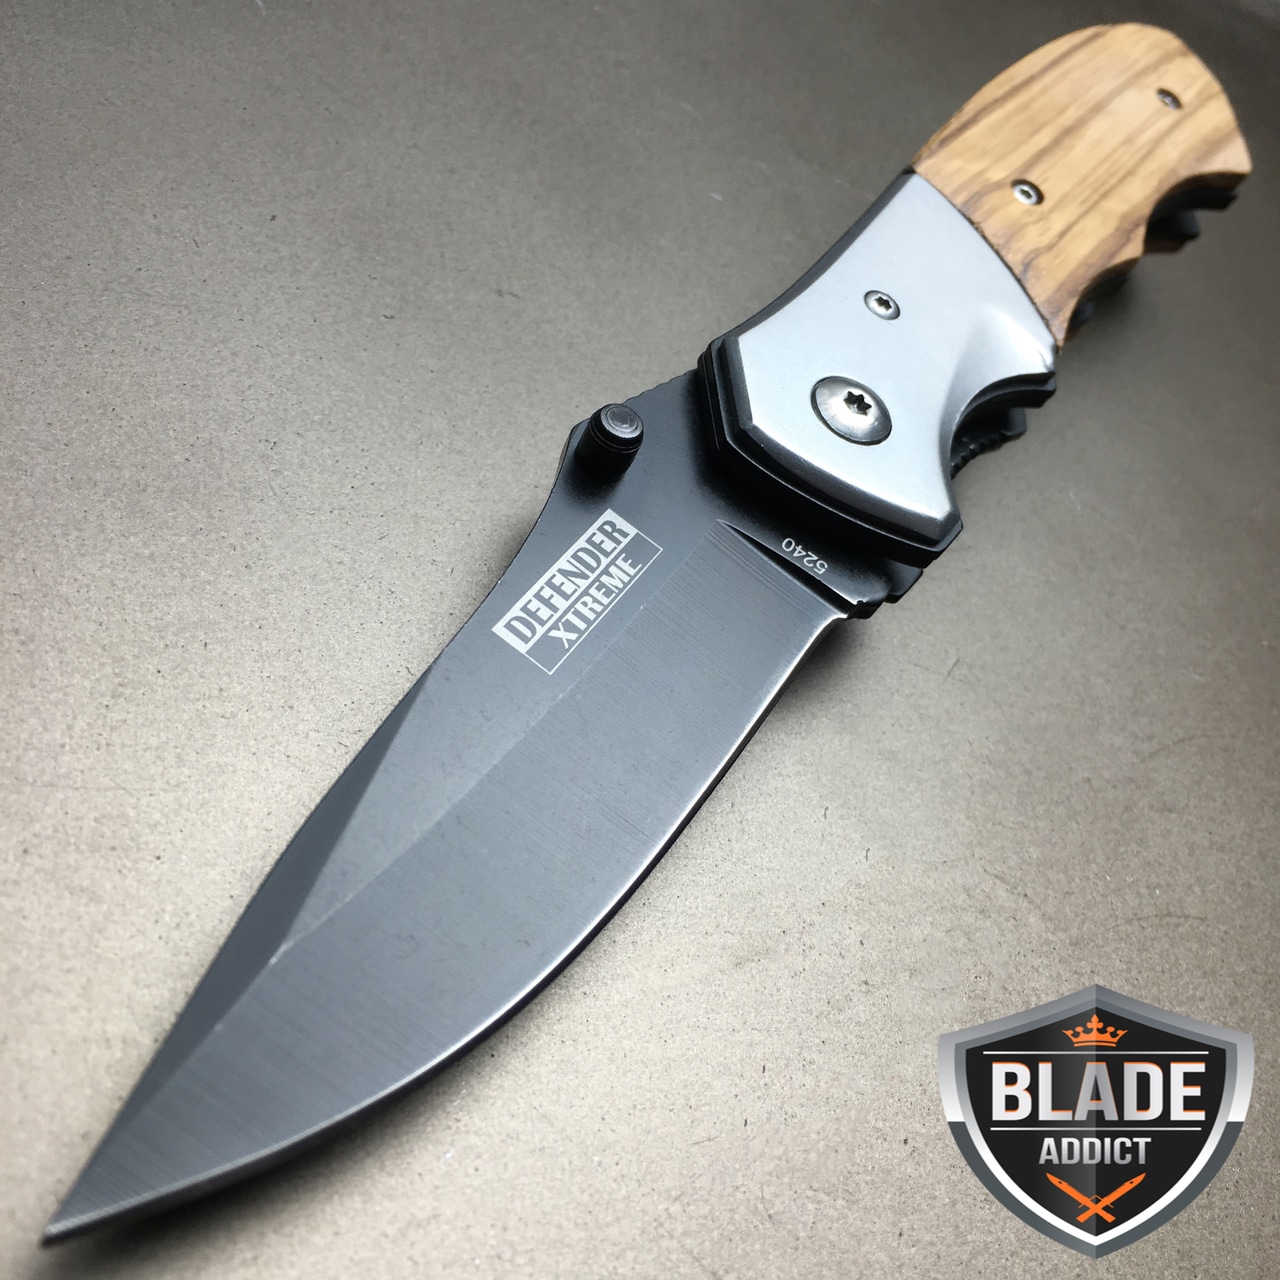 11" FULL TANG TACTICAL COMBAT FIXED BLADE HUNTING KNIFE SURVIVAL CAMPING BOWIE